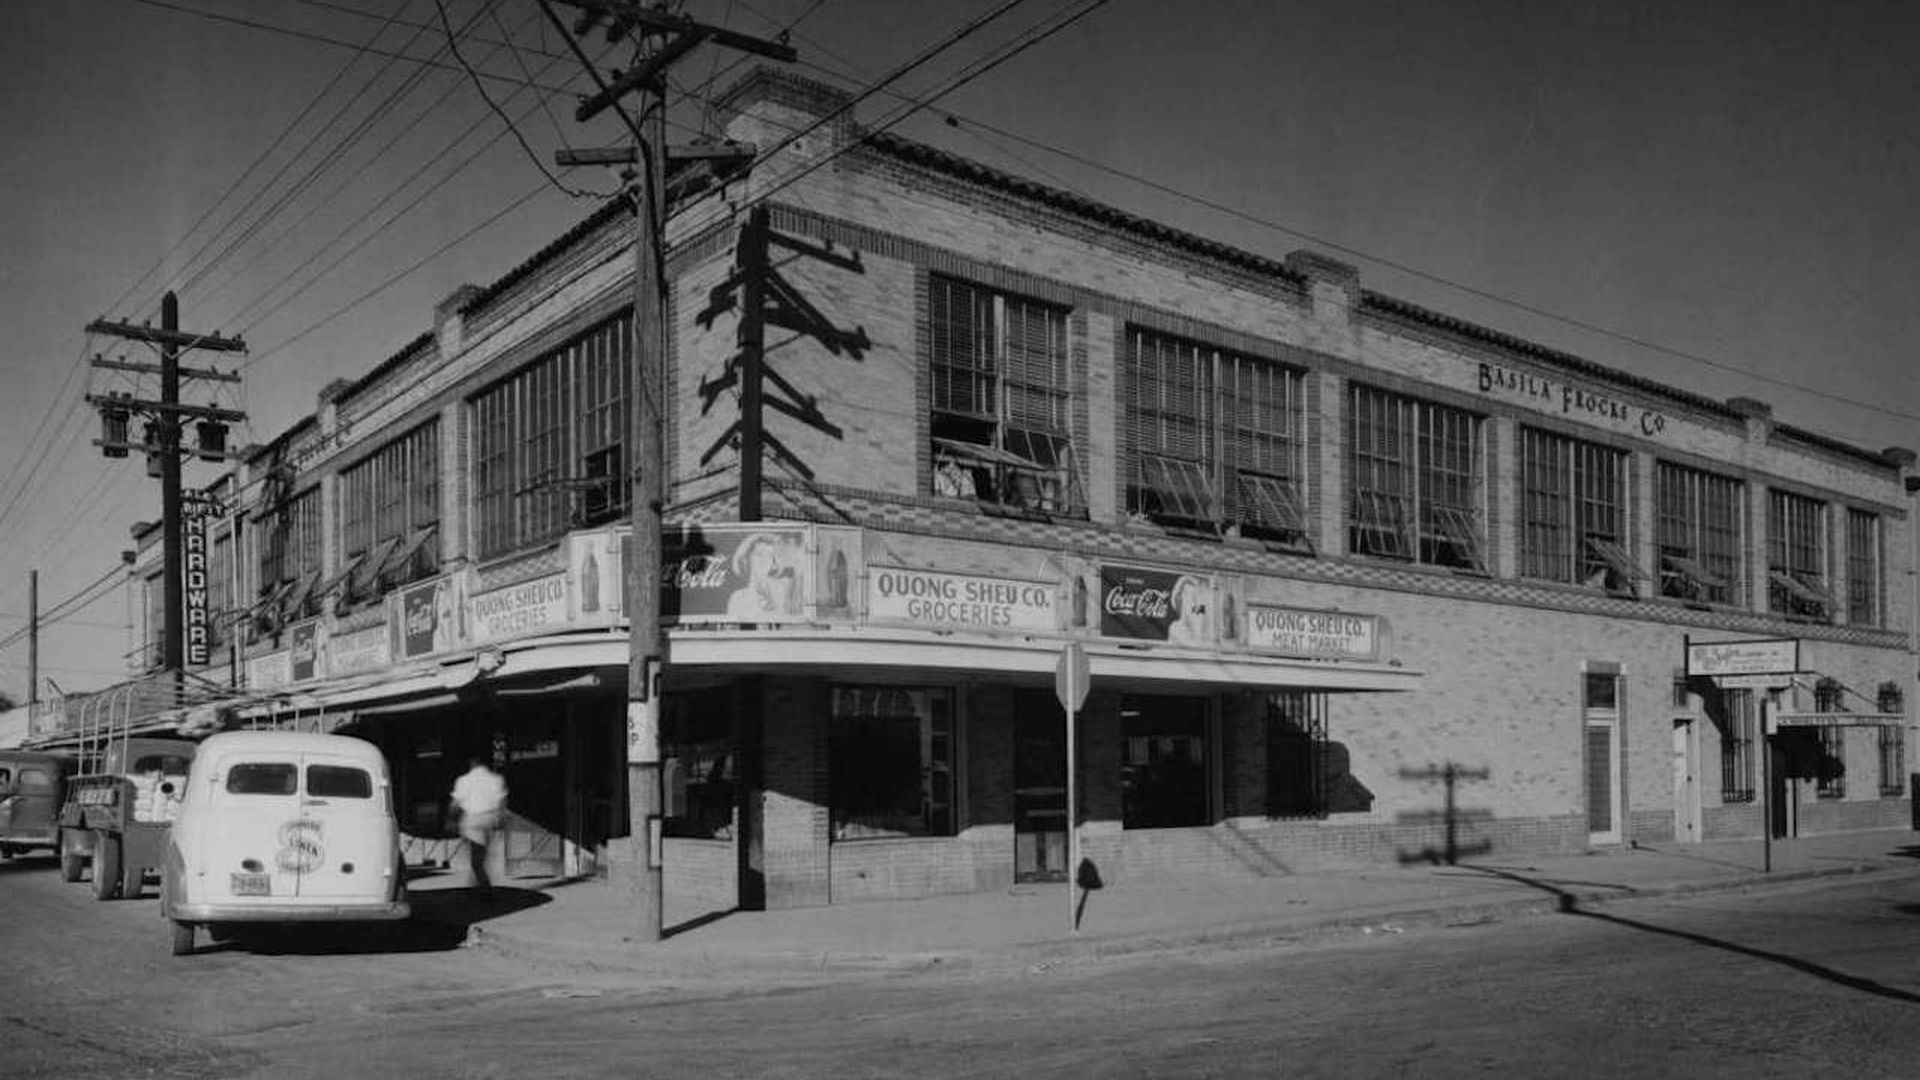 A black-and-white photo shows a two-story, brick building on a street corner with vintage cars parked outside.